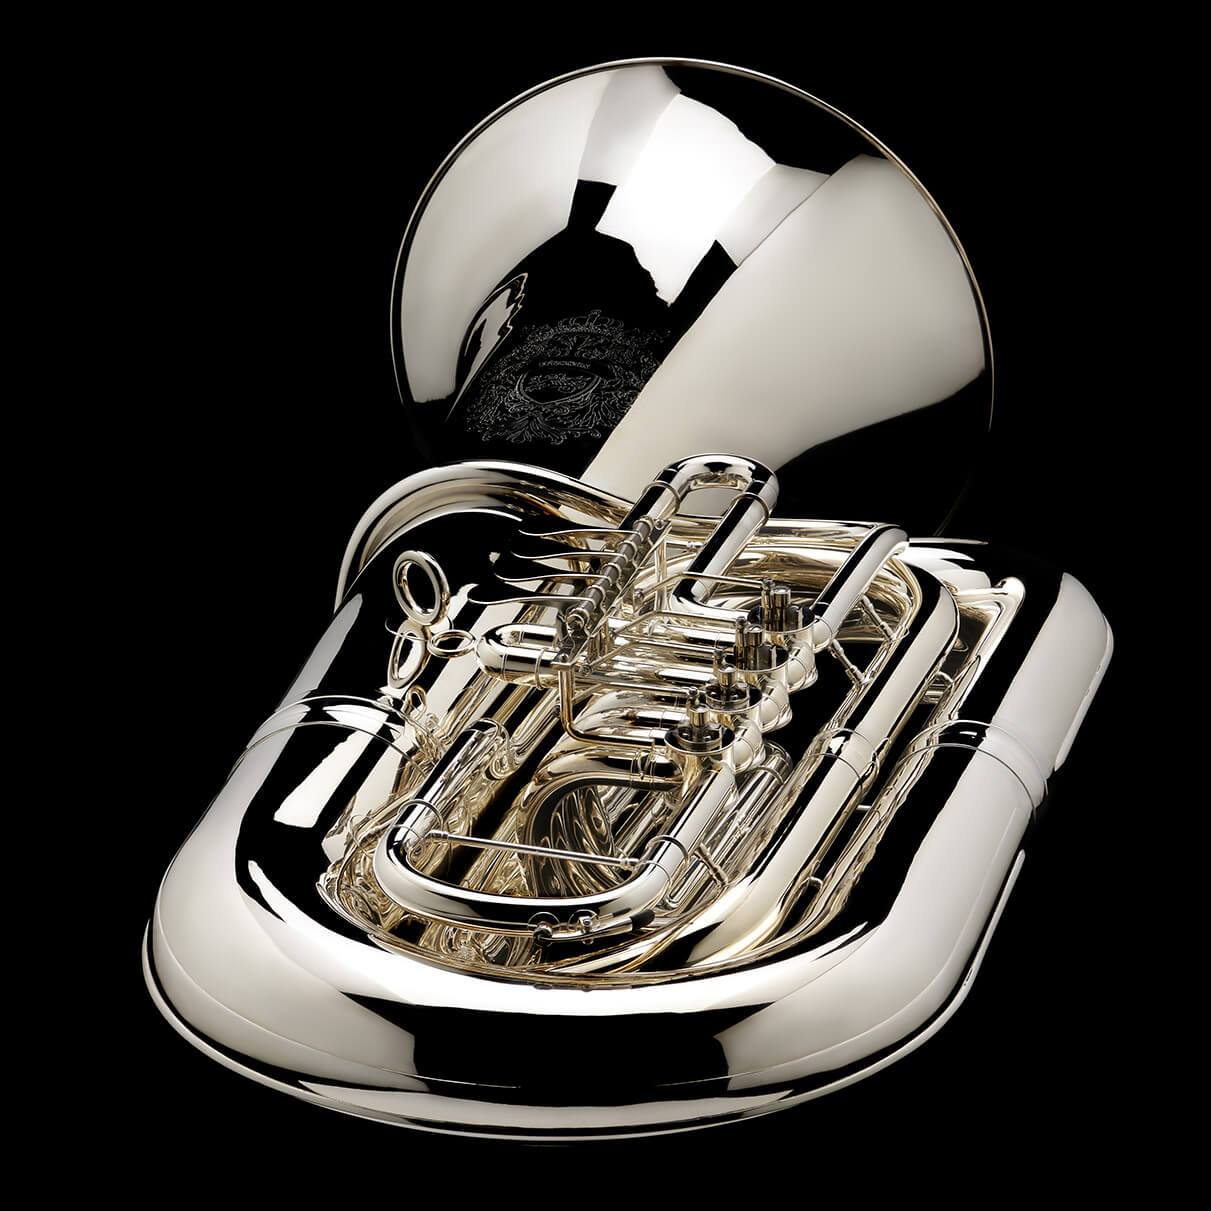 An image of a BBb 6/4 Rotary tuba ‘Kaiser’ from Wessex Tubas, laying flat